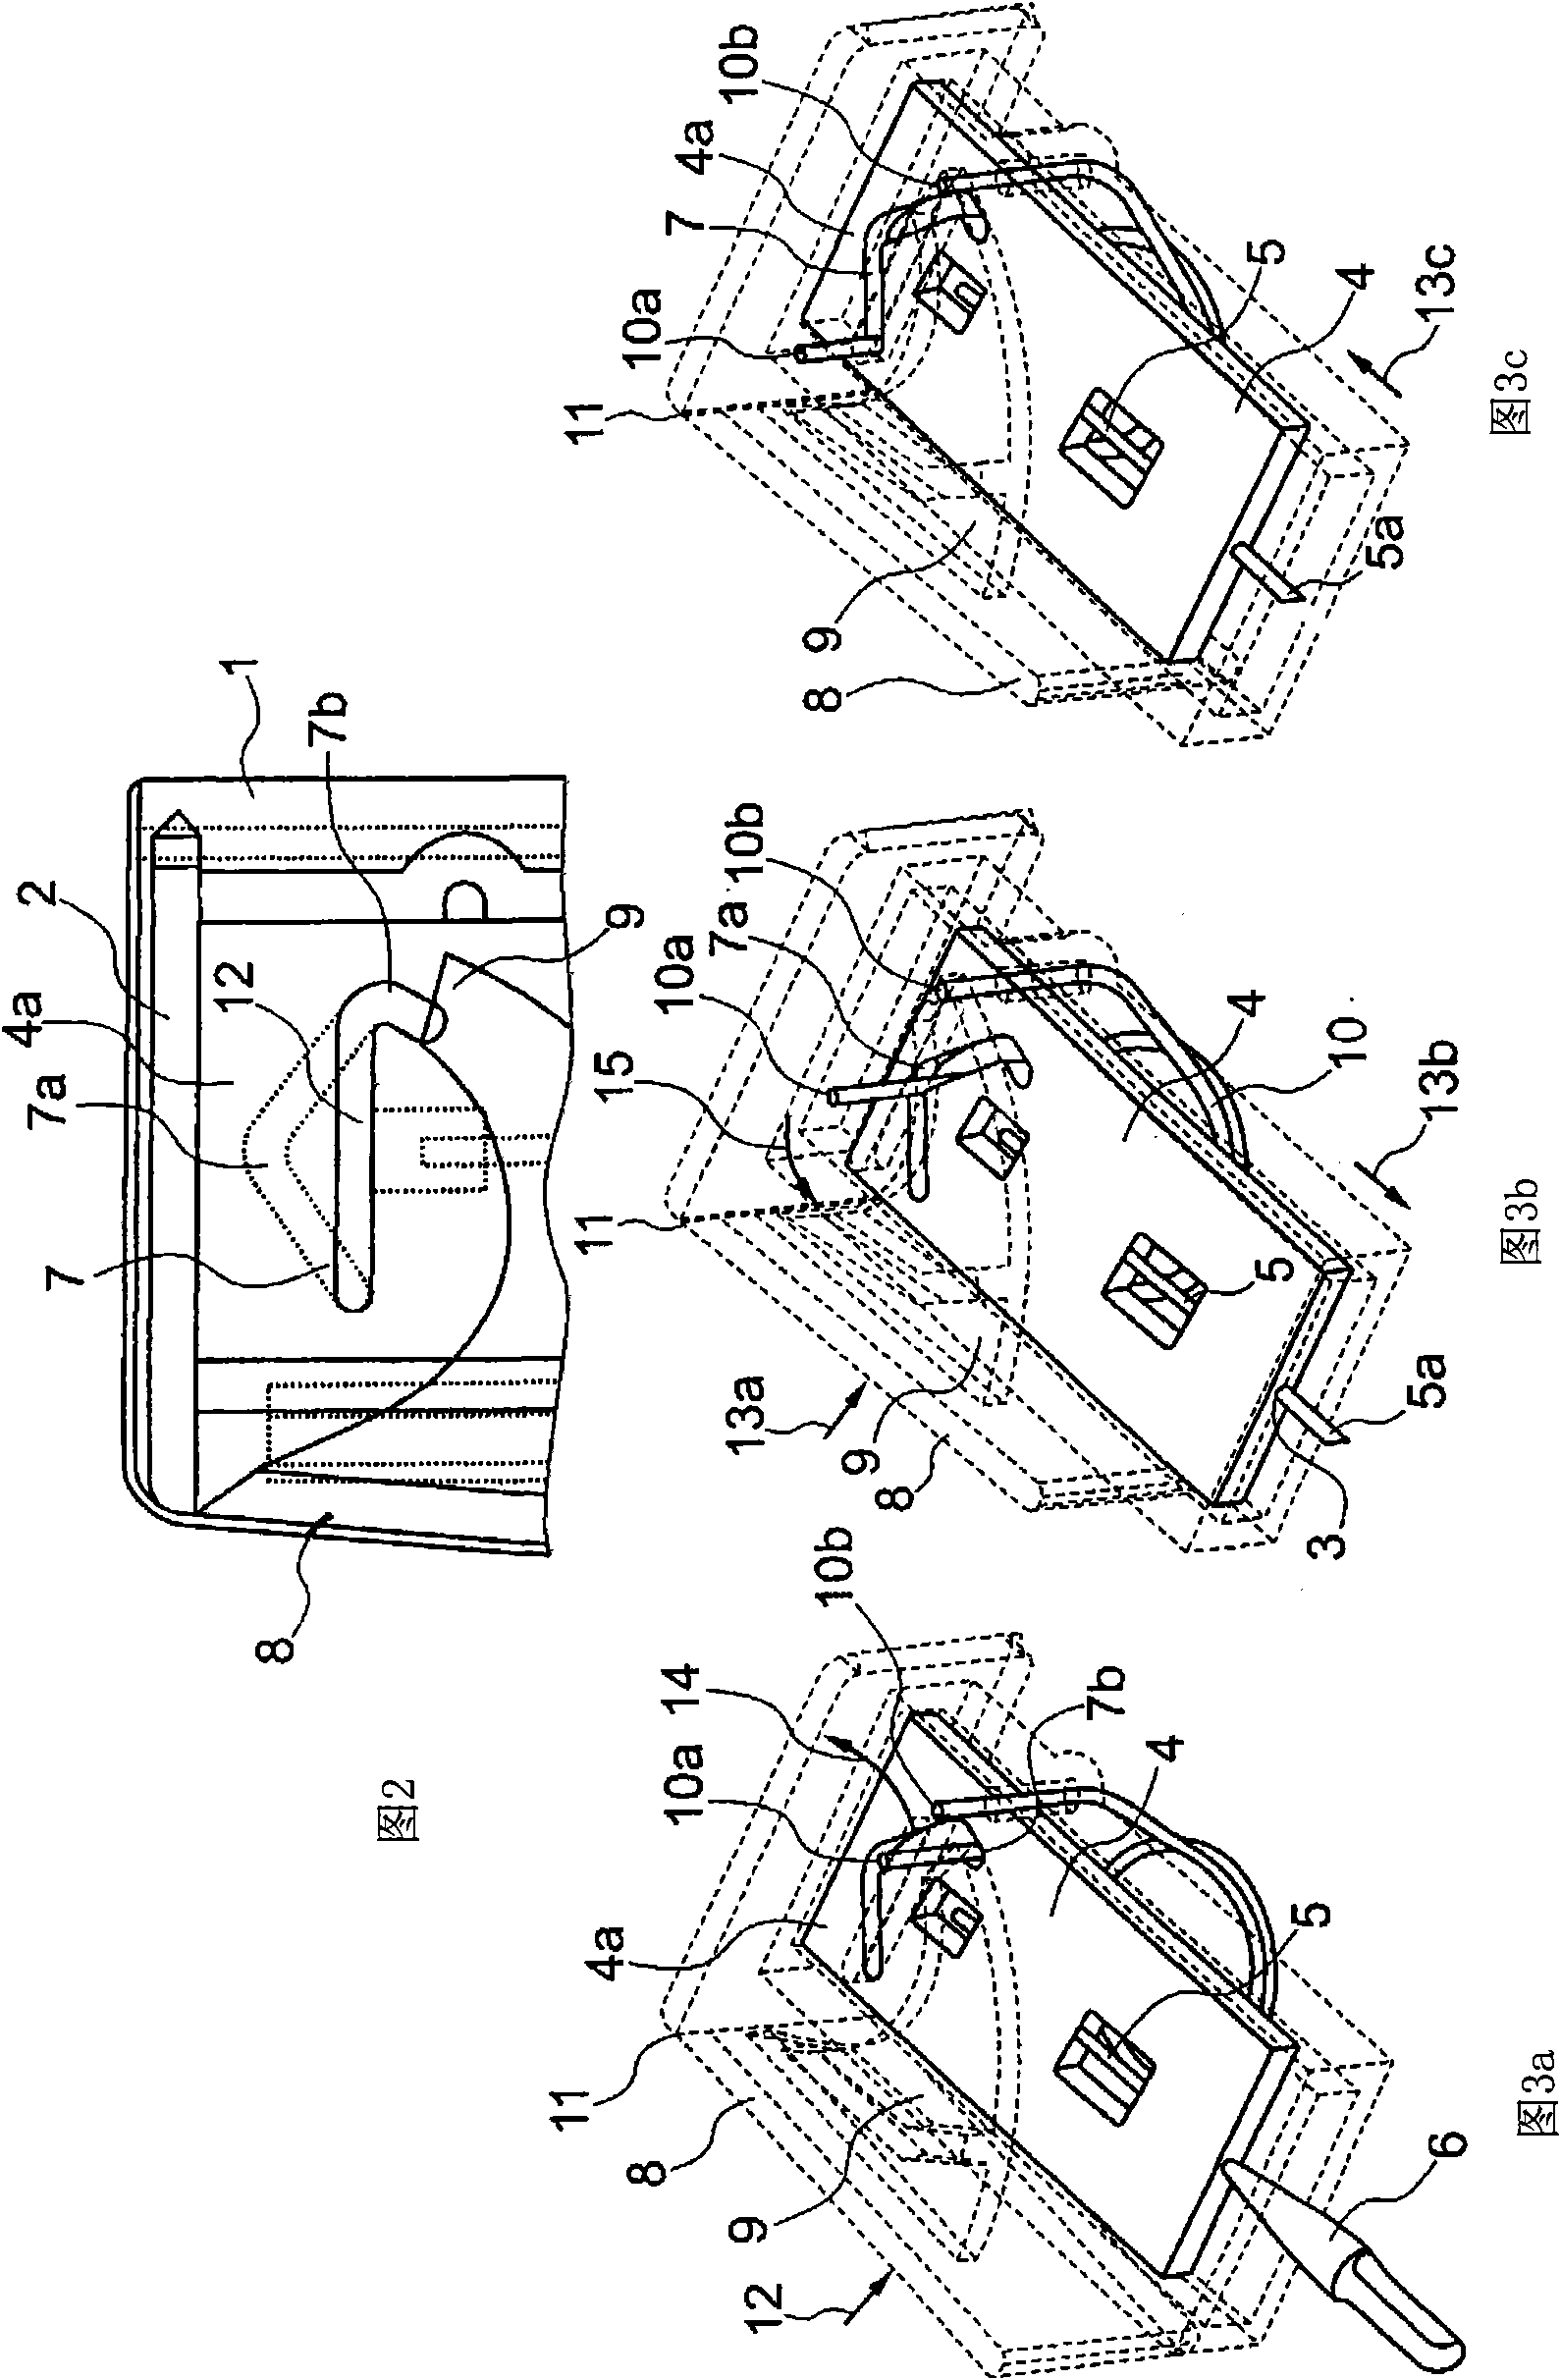 Pricking device comprising a torsional spring